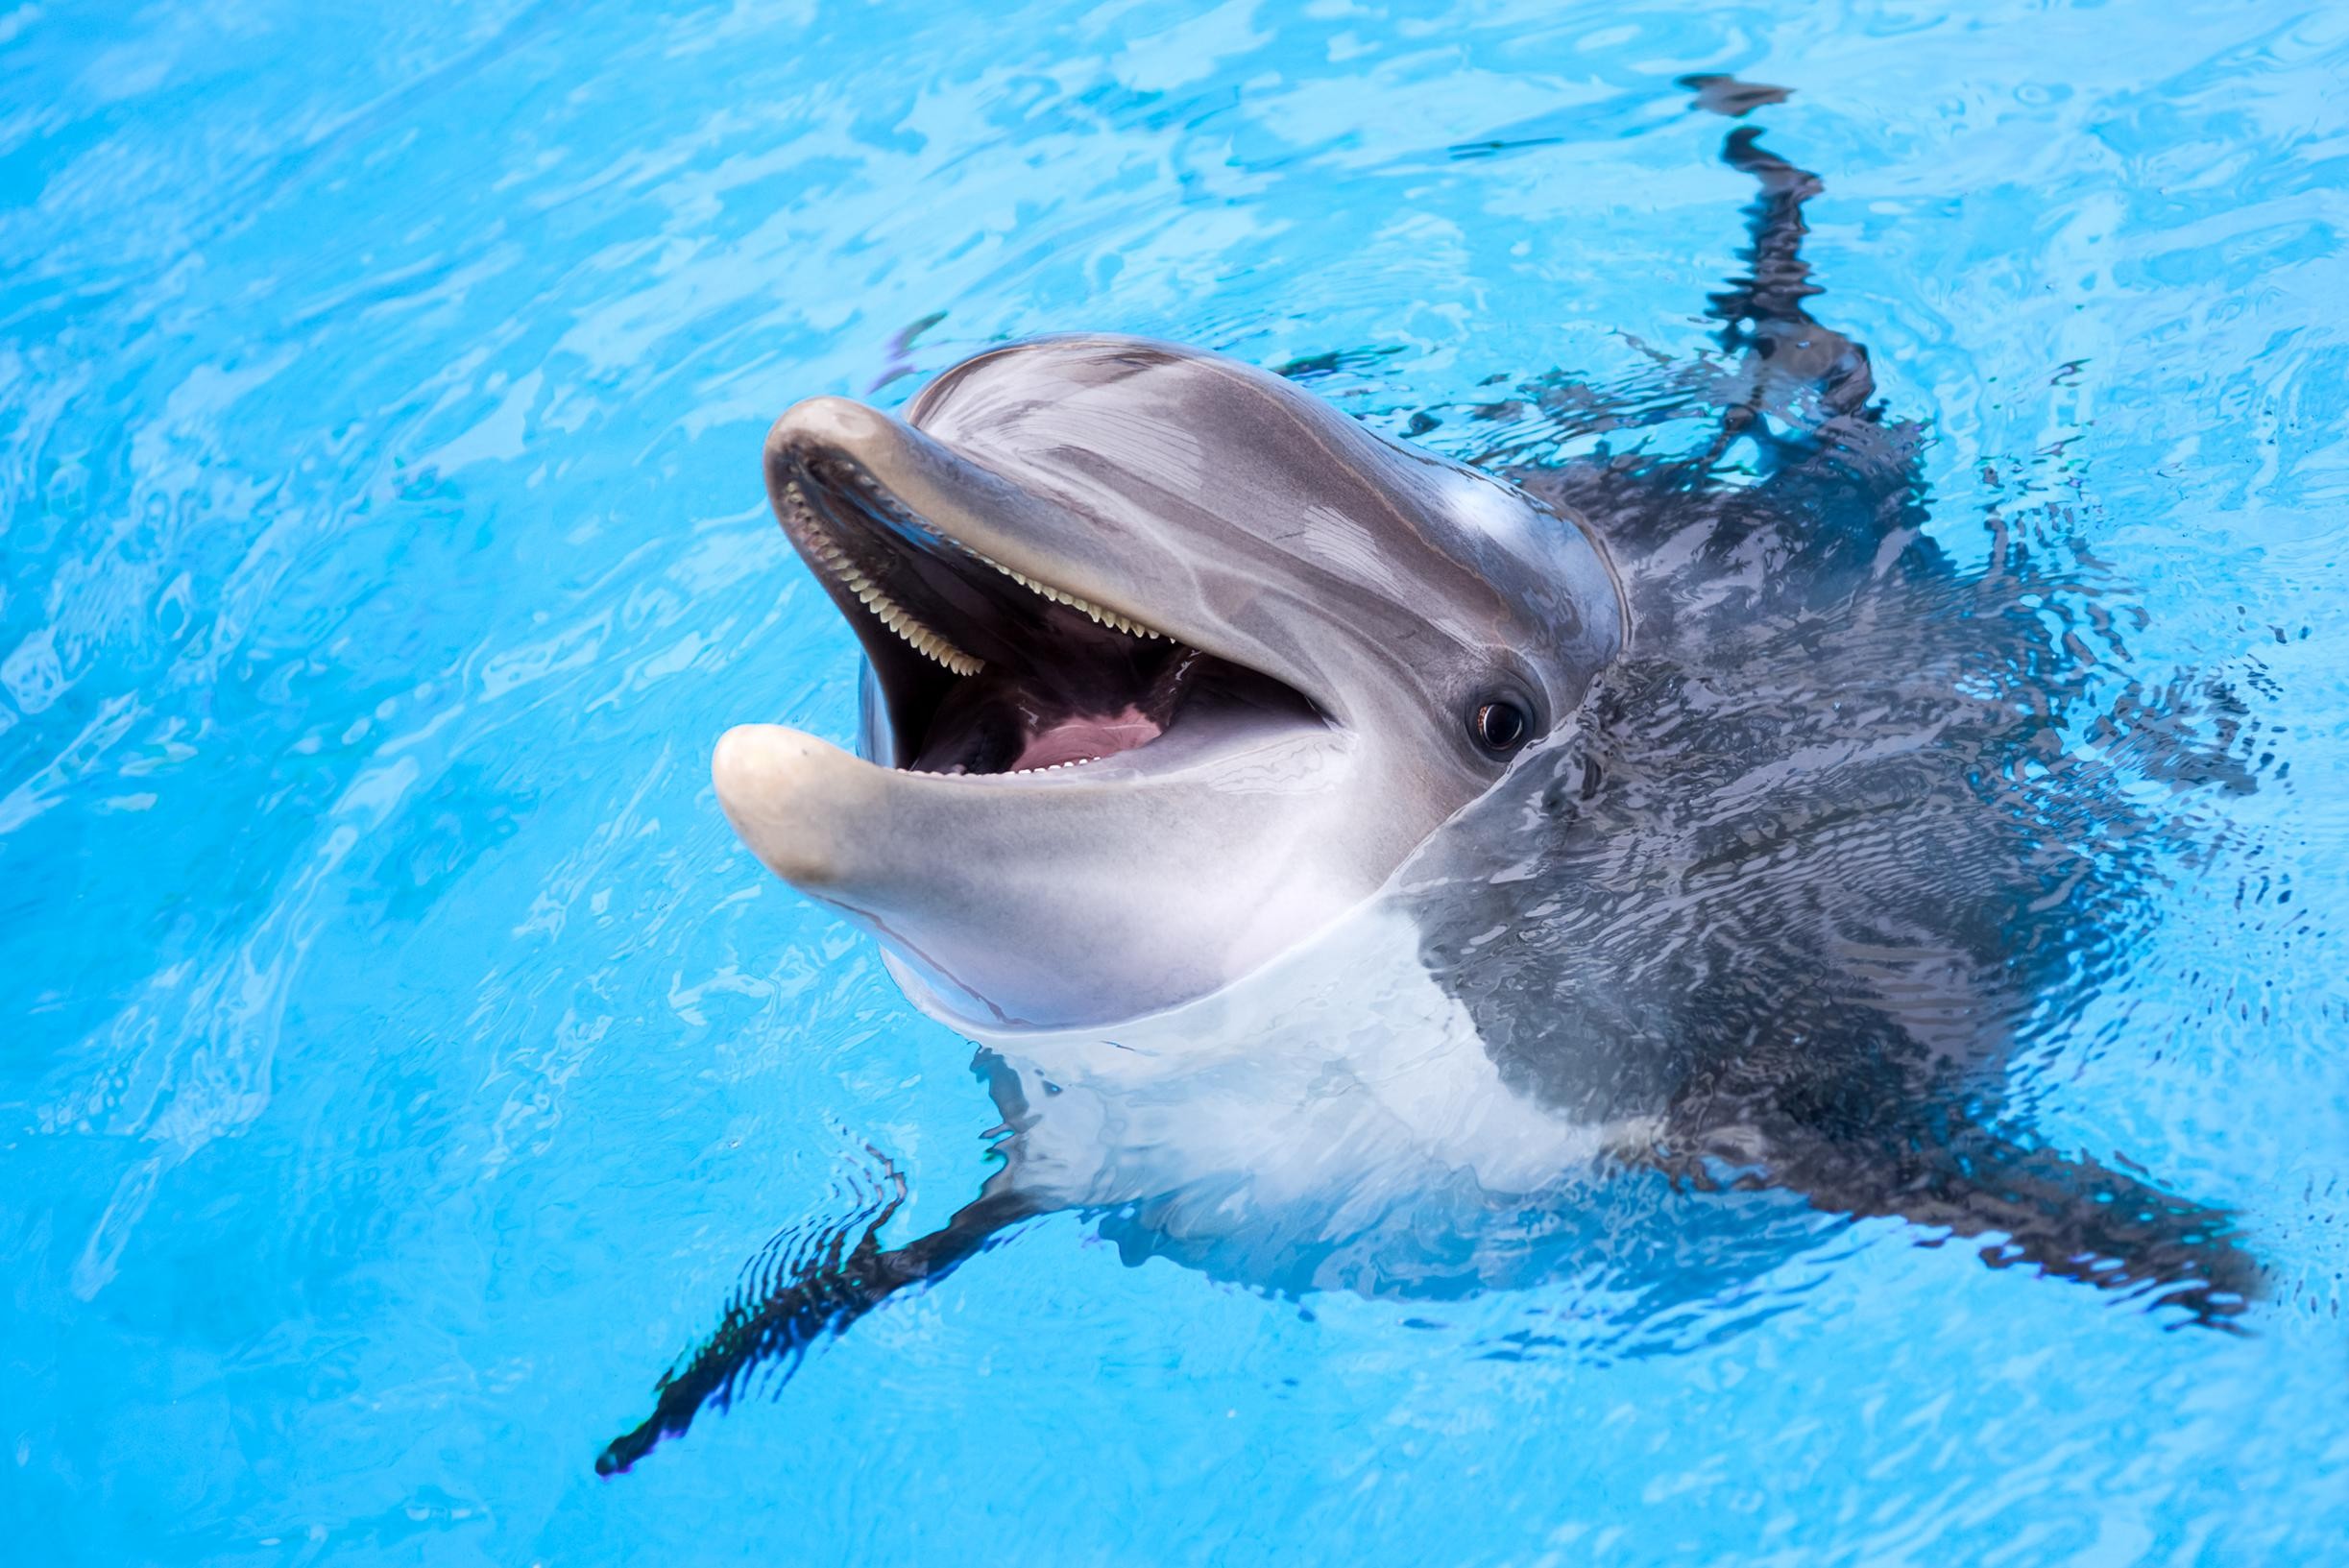 Anger among animal protectors over the move of dolphins to ‘chlorine bath in desert’